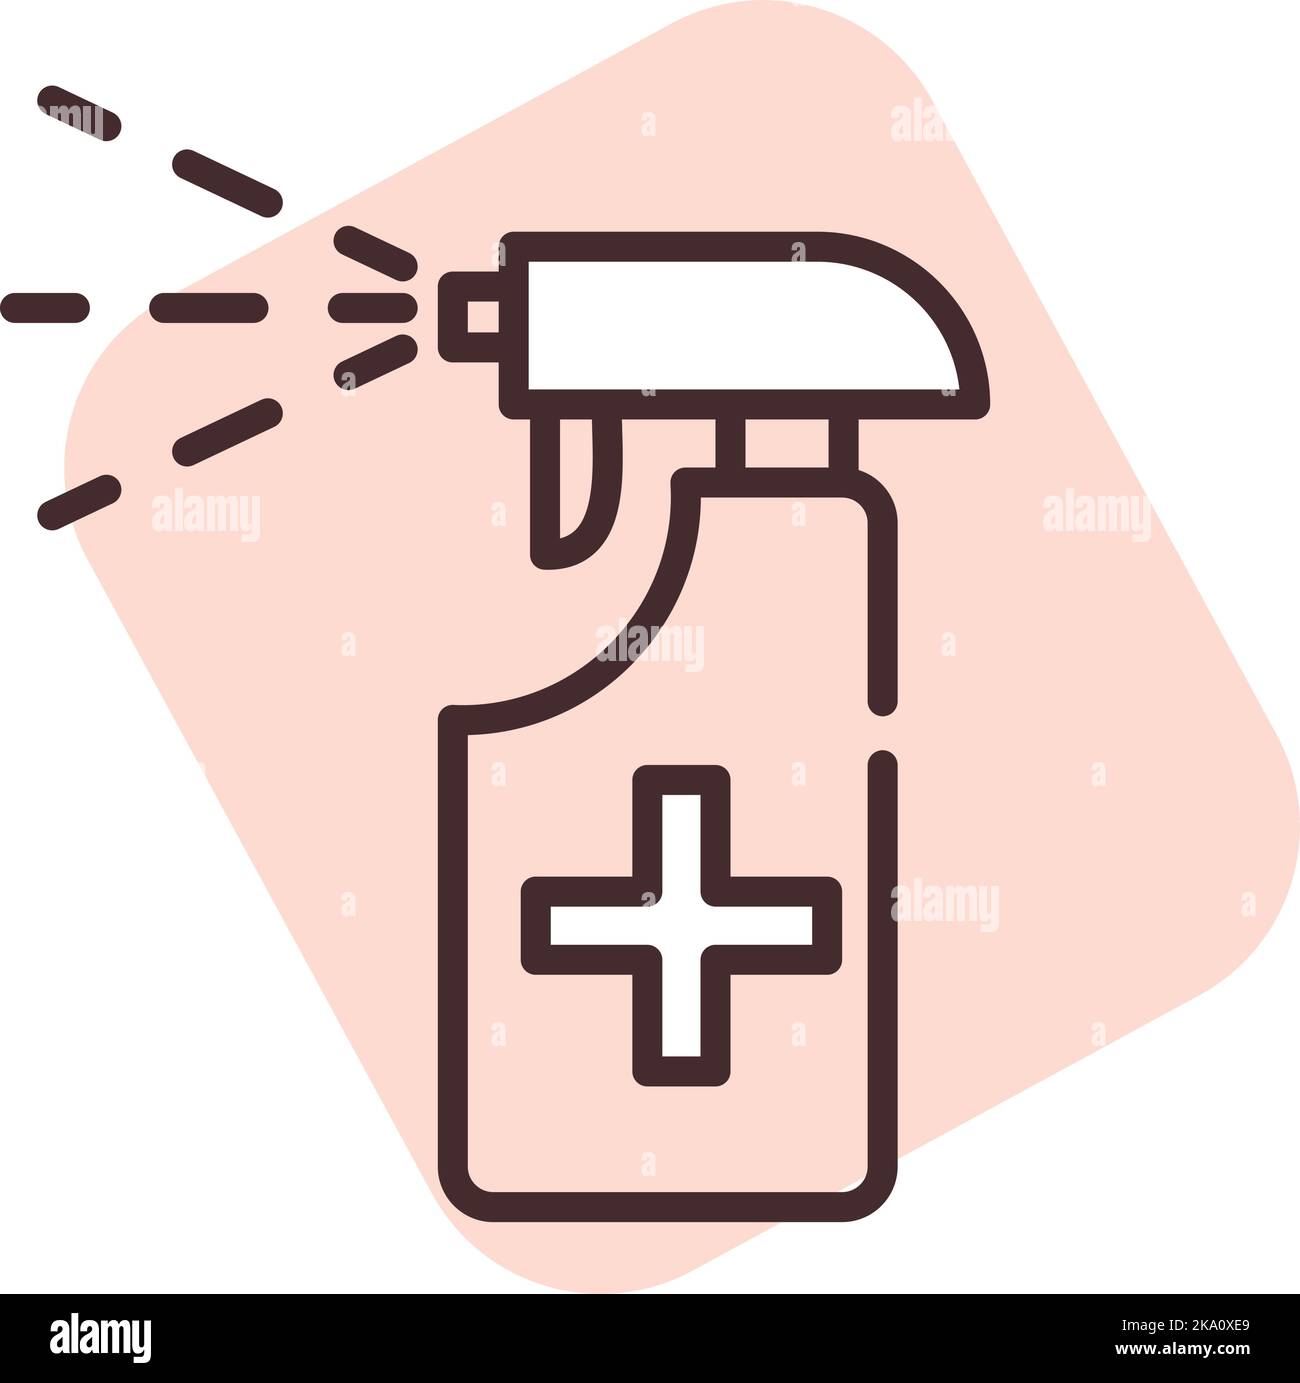 Cleaning desinfection spray, illustration or icon, vector on white background. Stock Vector